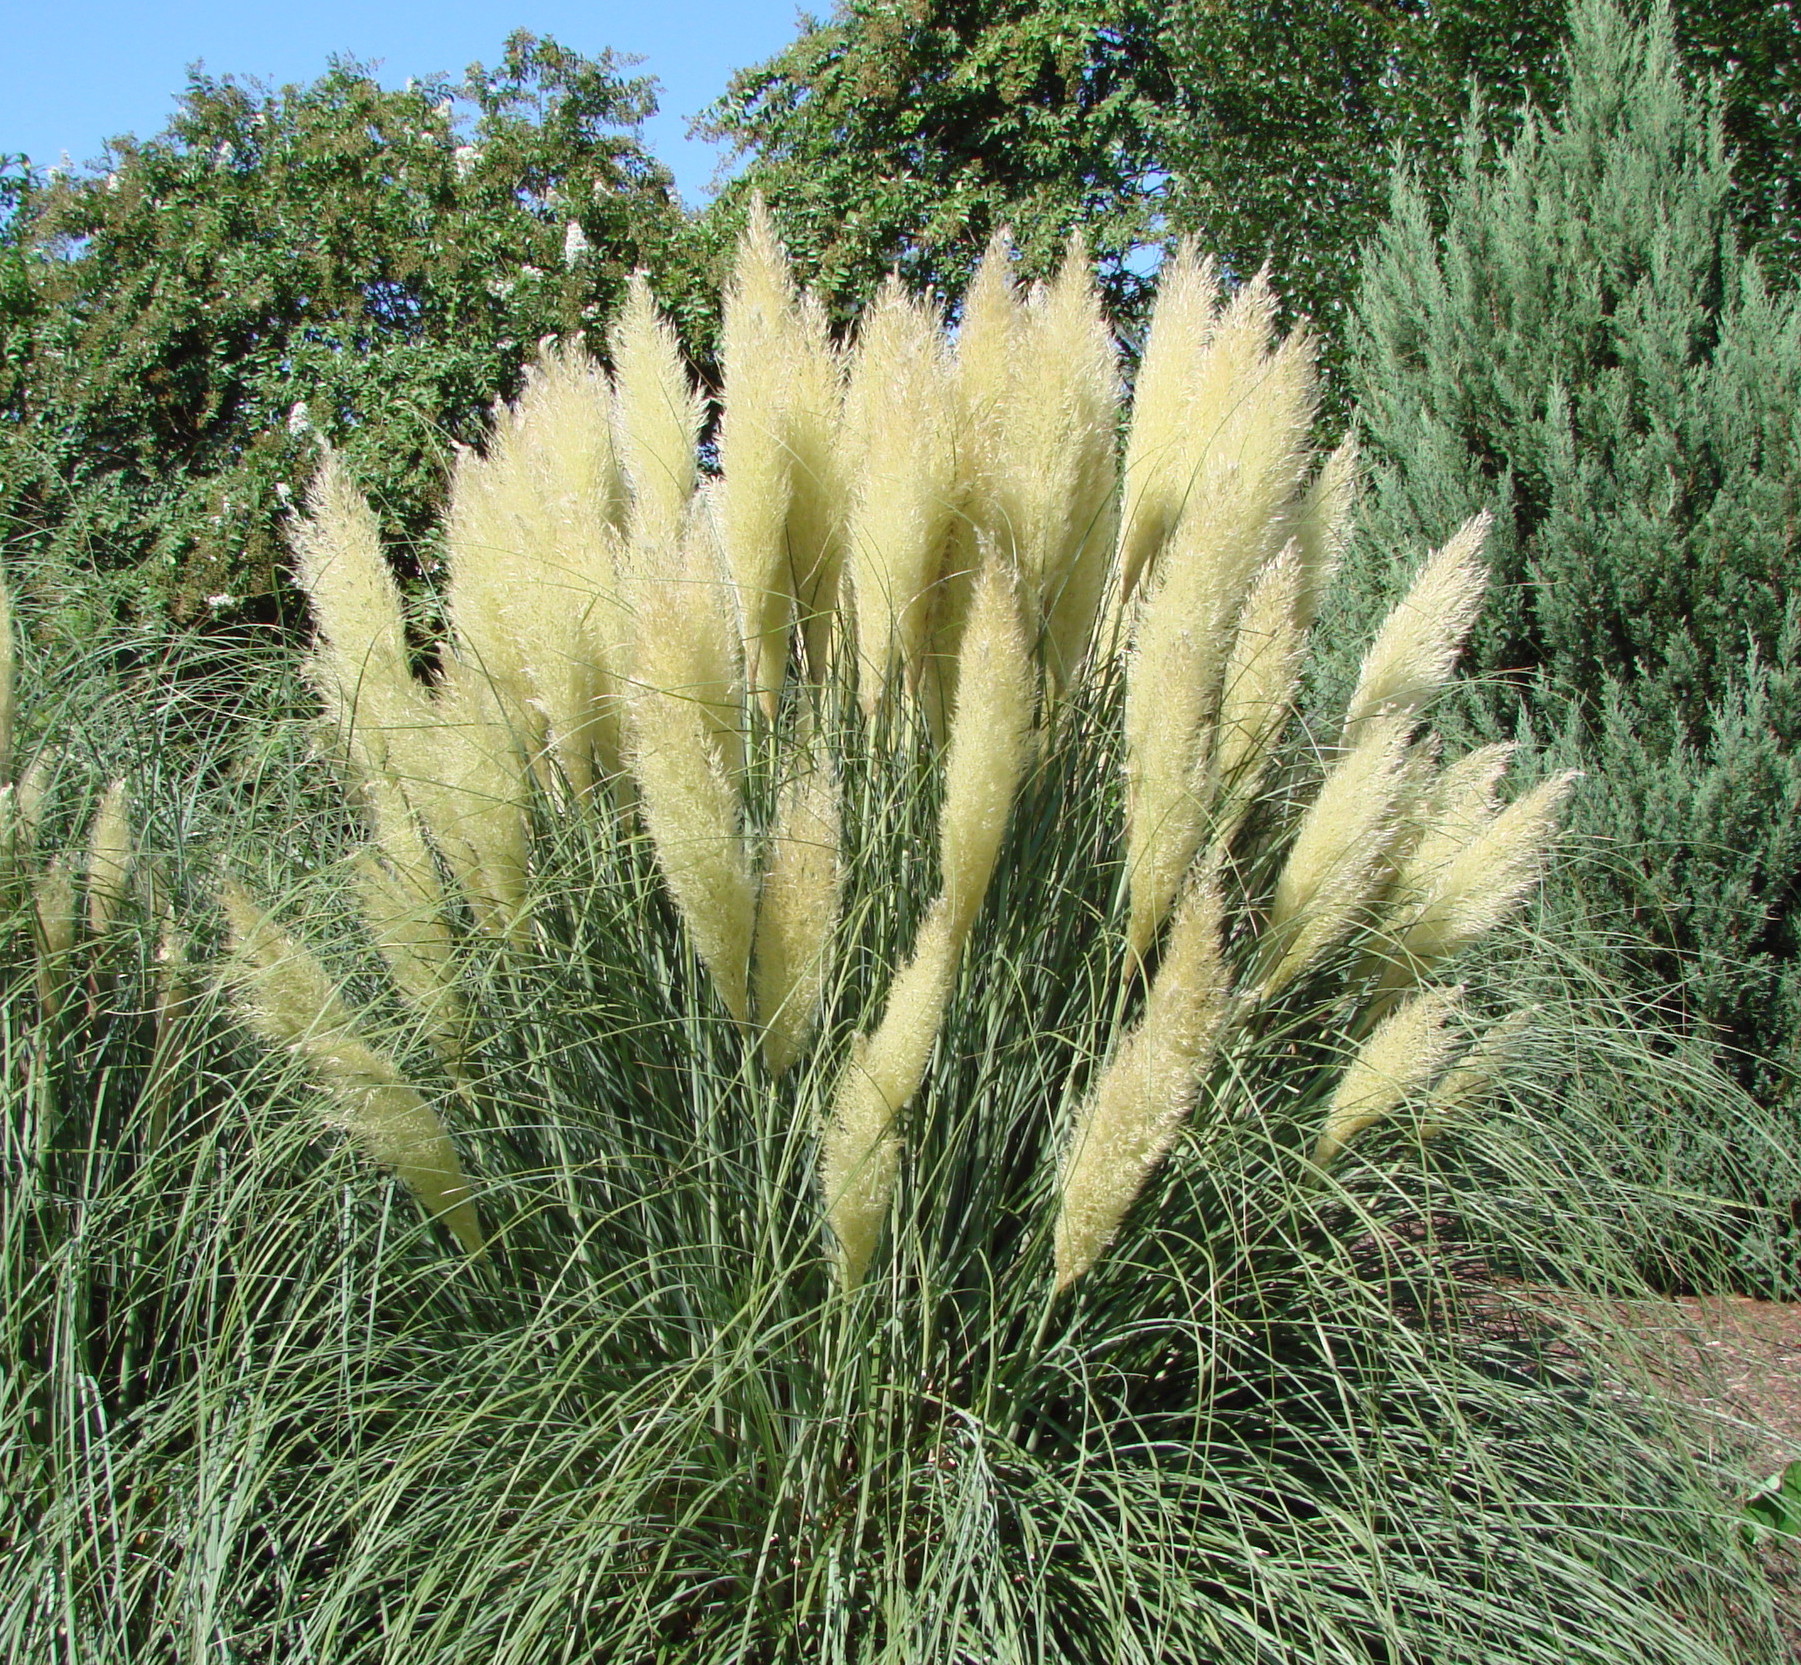 Plumes, the flowers of grasses | Omaha Landscaping ...